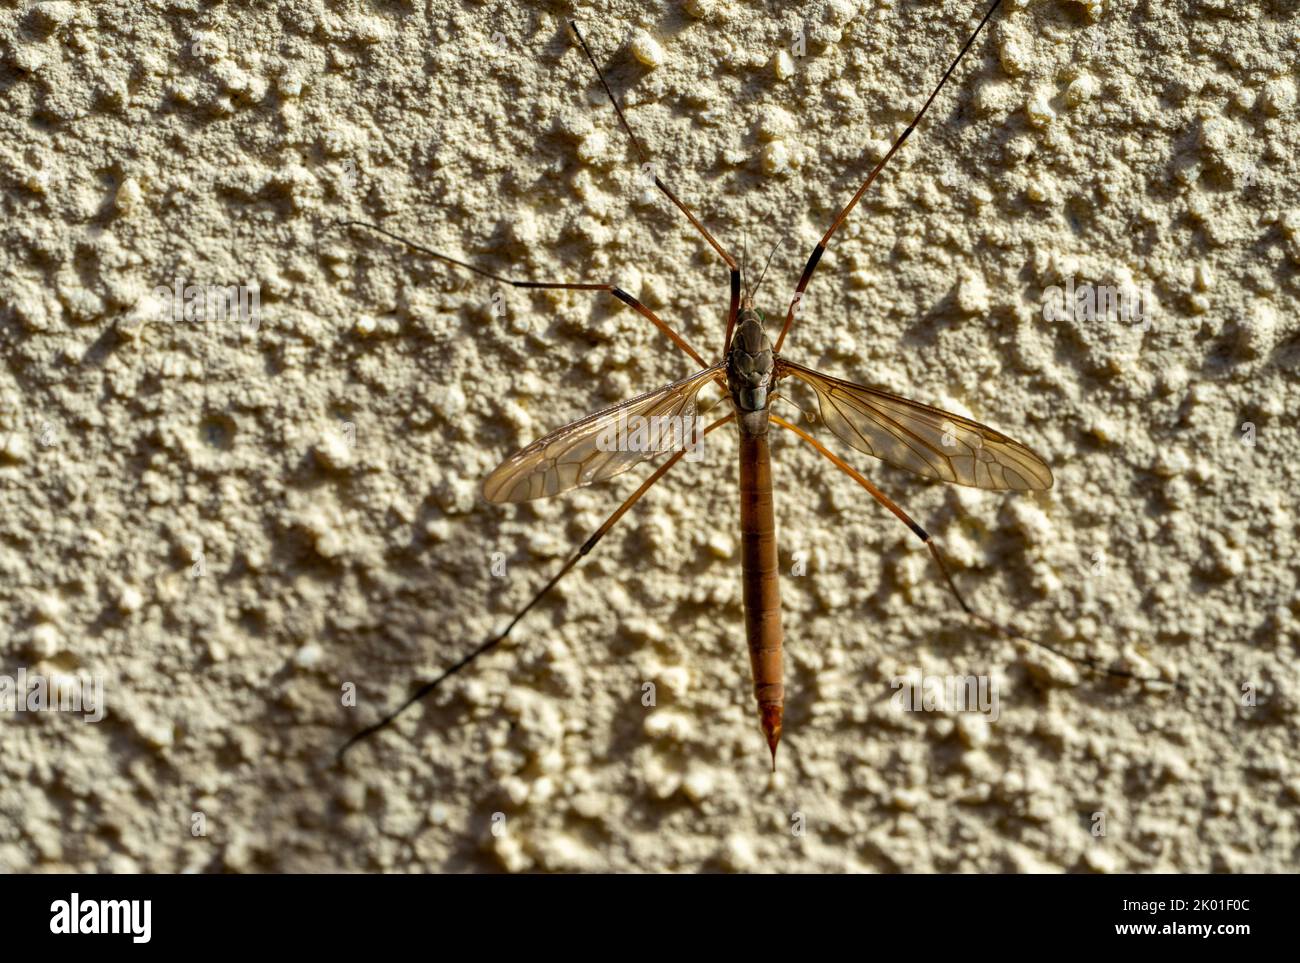 Cranky mosquito on a wall Stock Photo